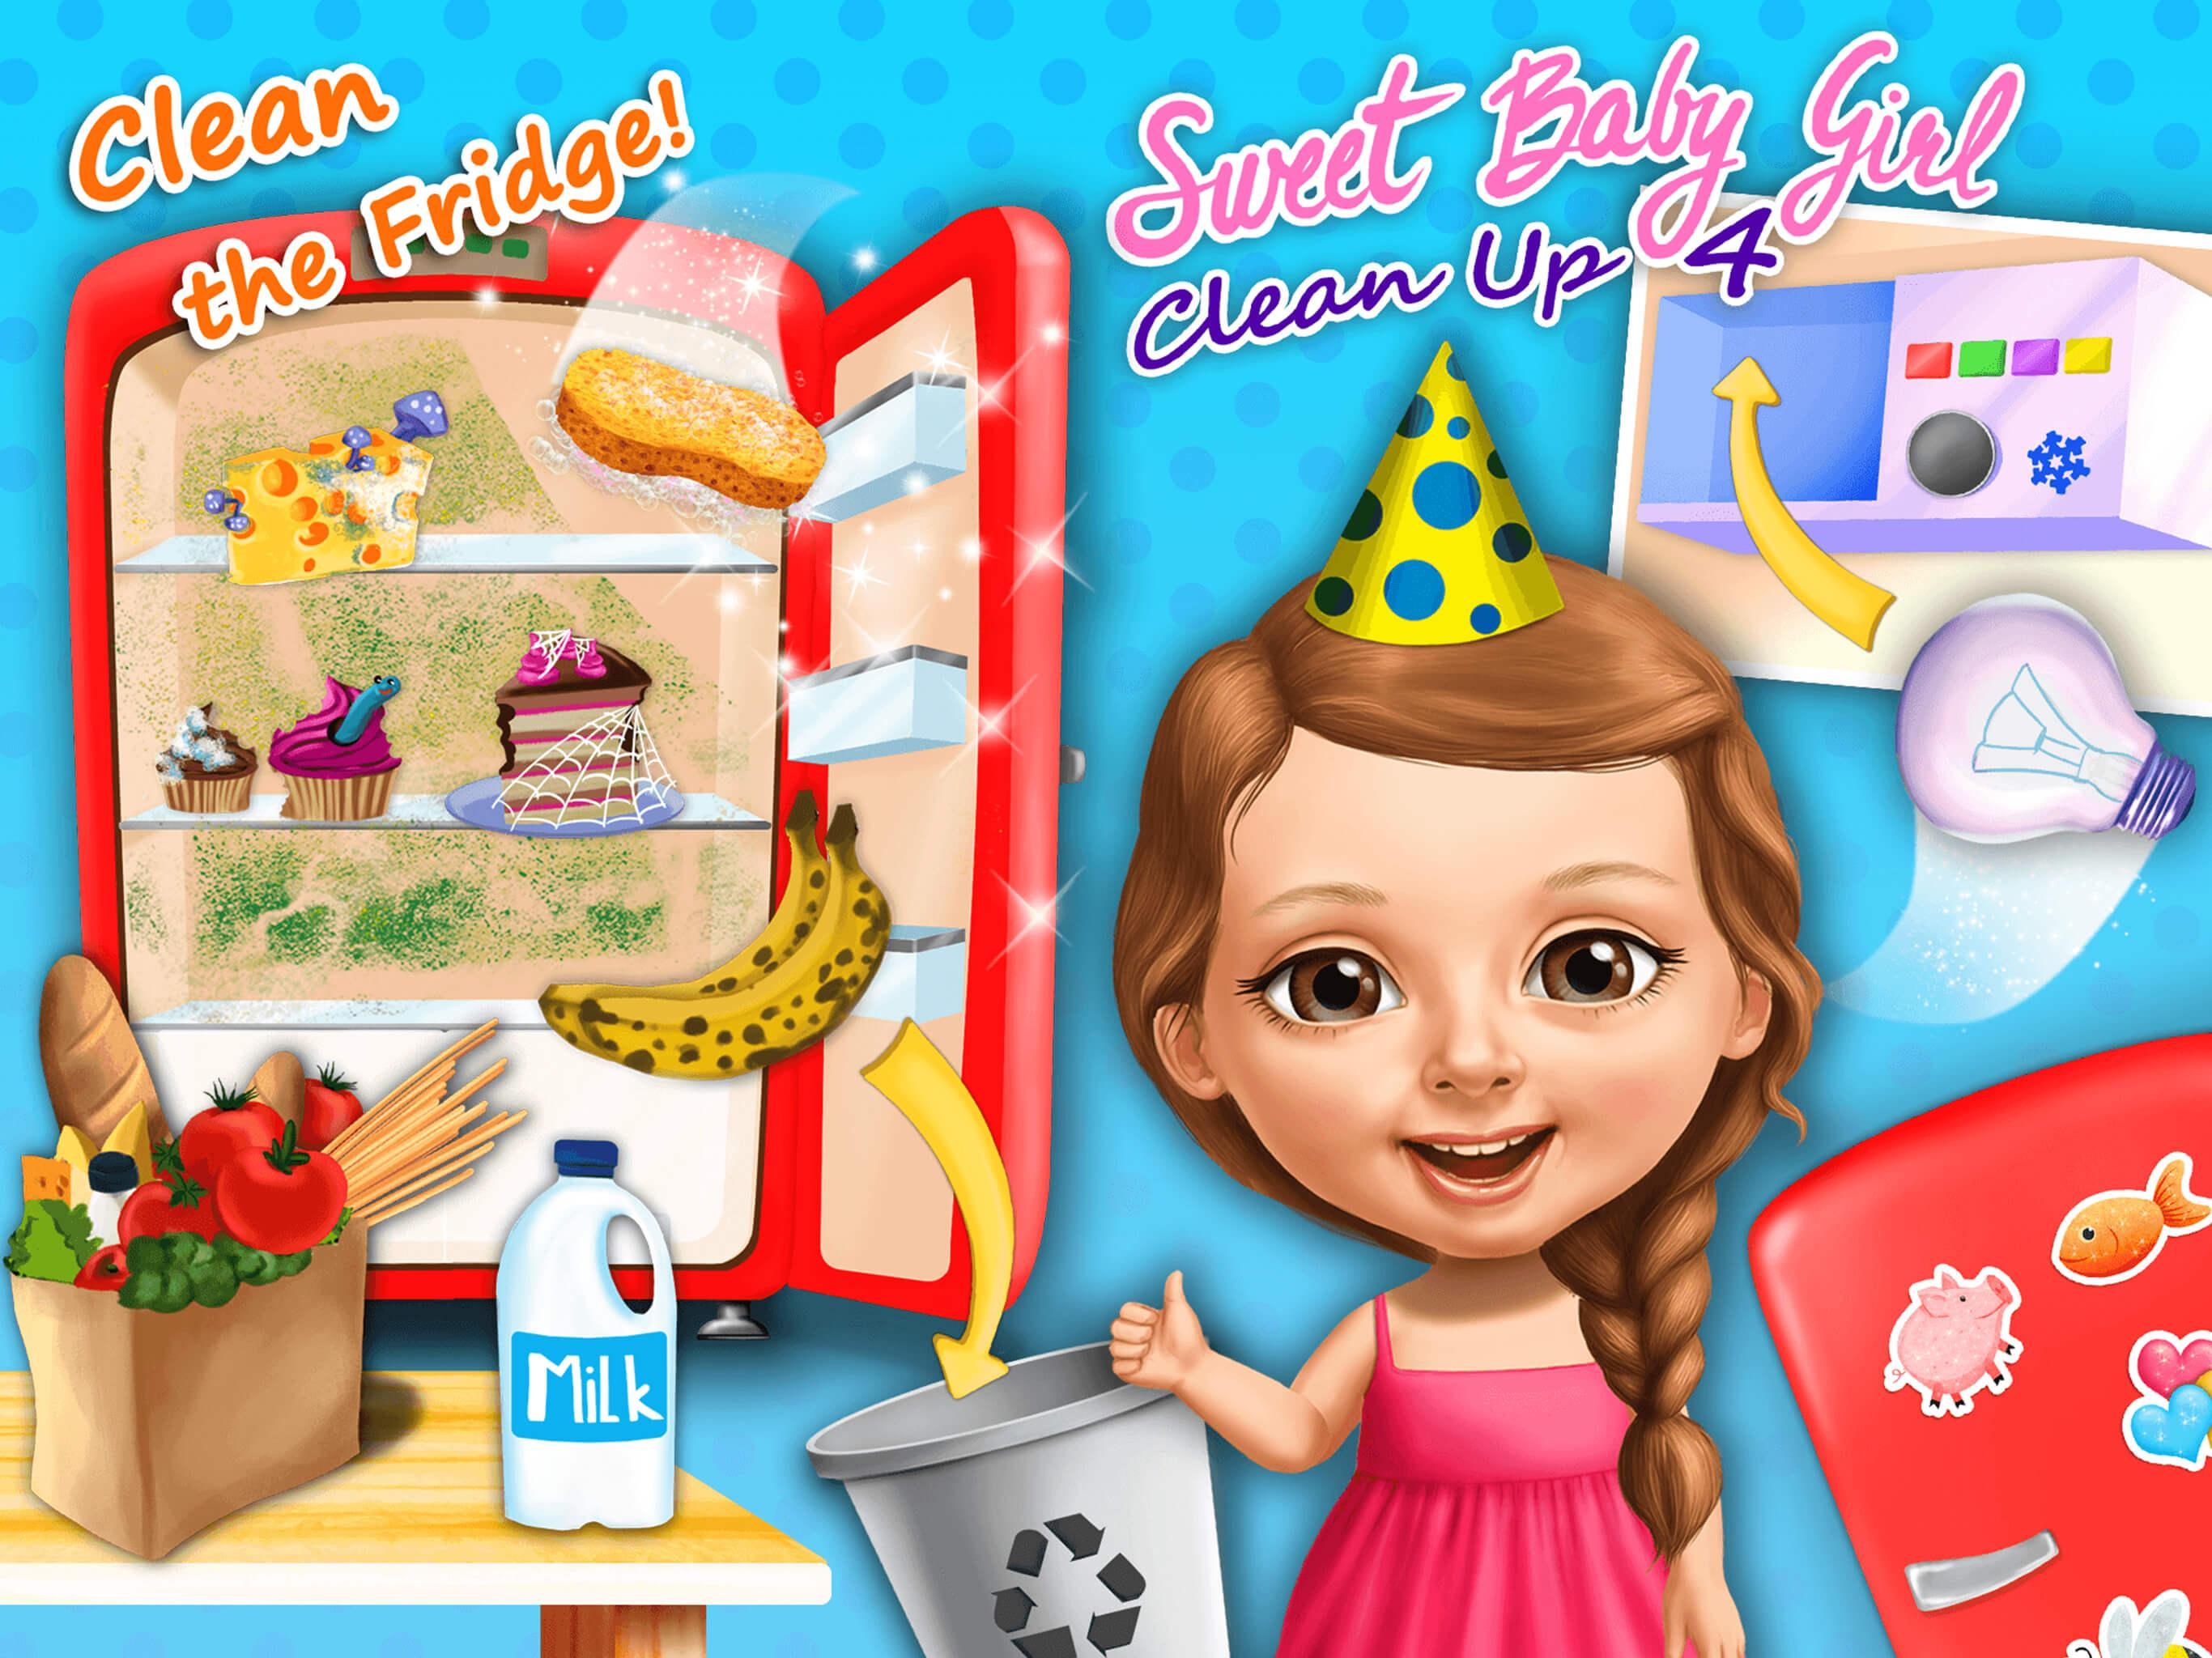 Sweet Baby Girl Cleanup 4 - House, Pool & Stable 4.0.10003 Screenshot 15